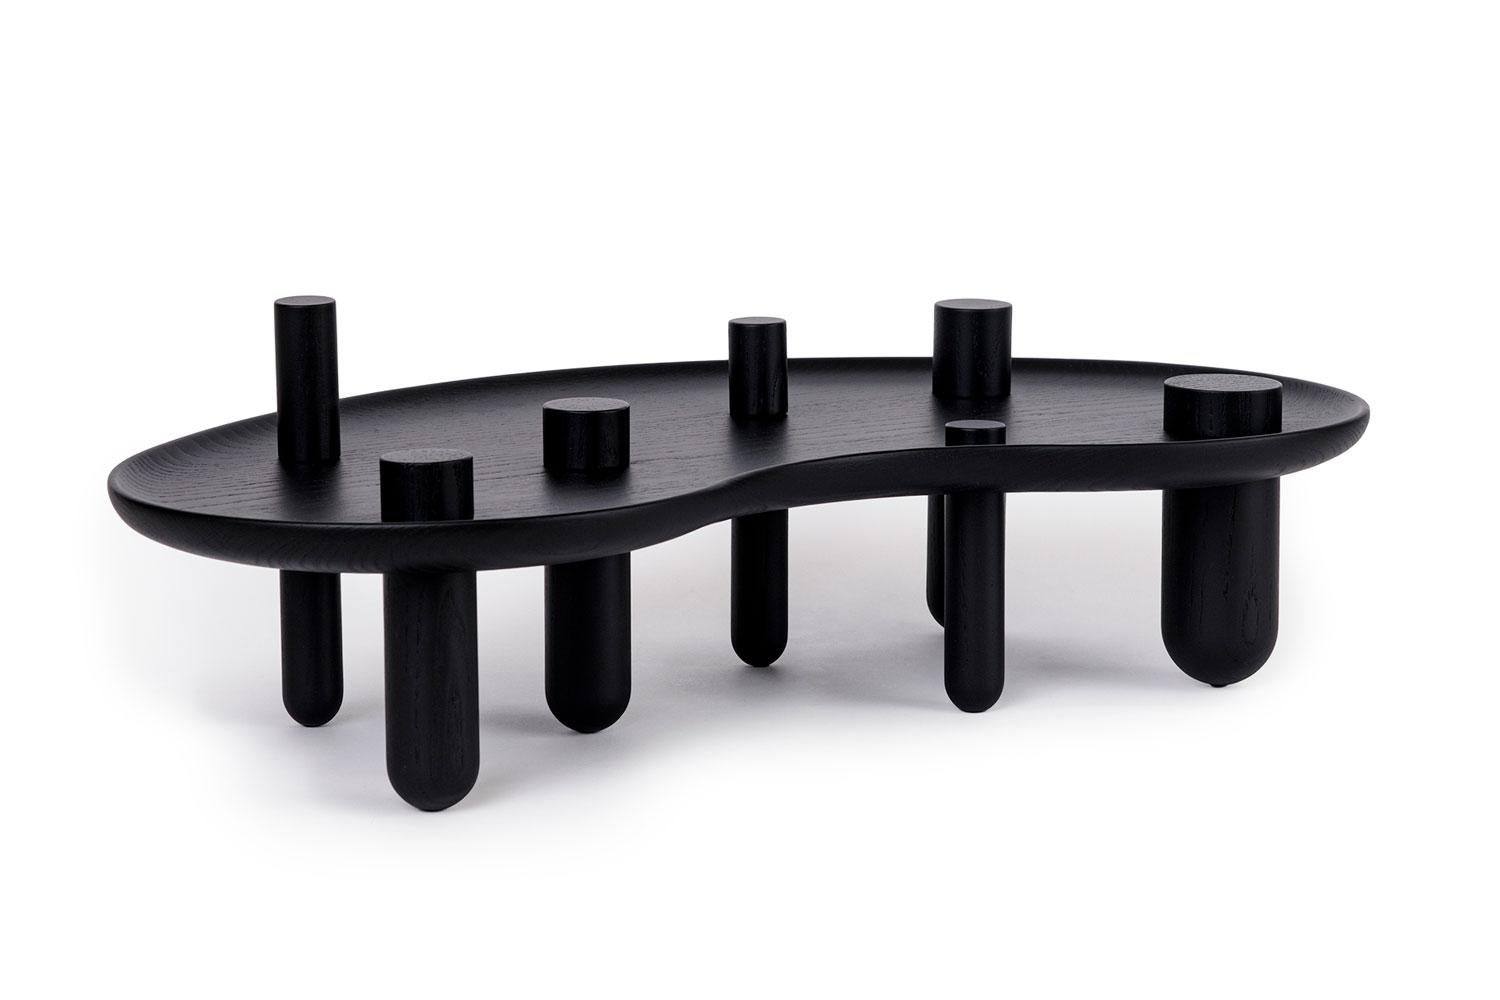 Reaction Poetique tray by Cassina

This sculptural table top tray from Cassina employs form, light, and shade to express the ineffable beauty of wood, thanks also to the masterful crafts skills of Cassina’s carpenters. Inspired by the organic